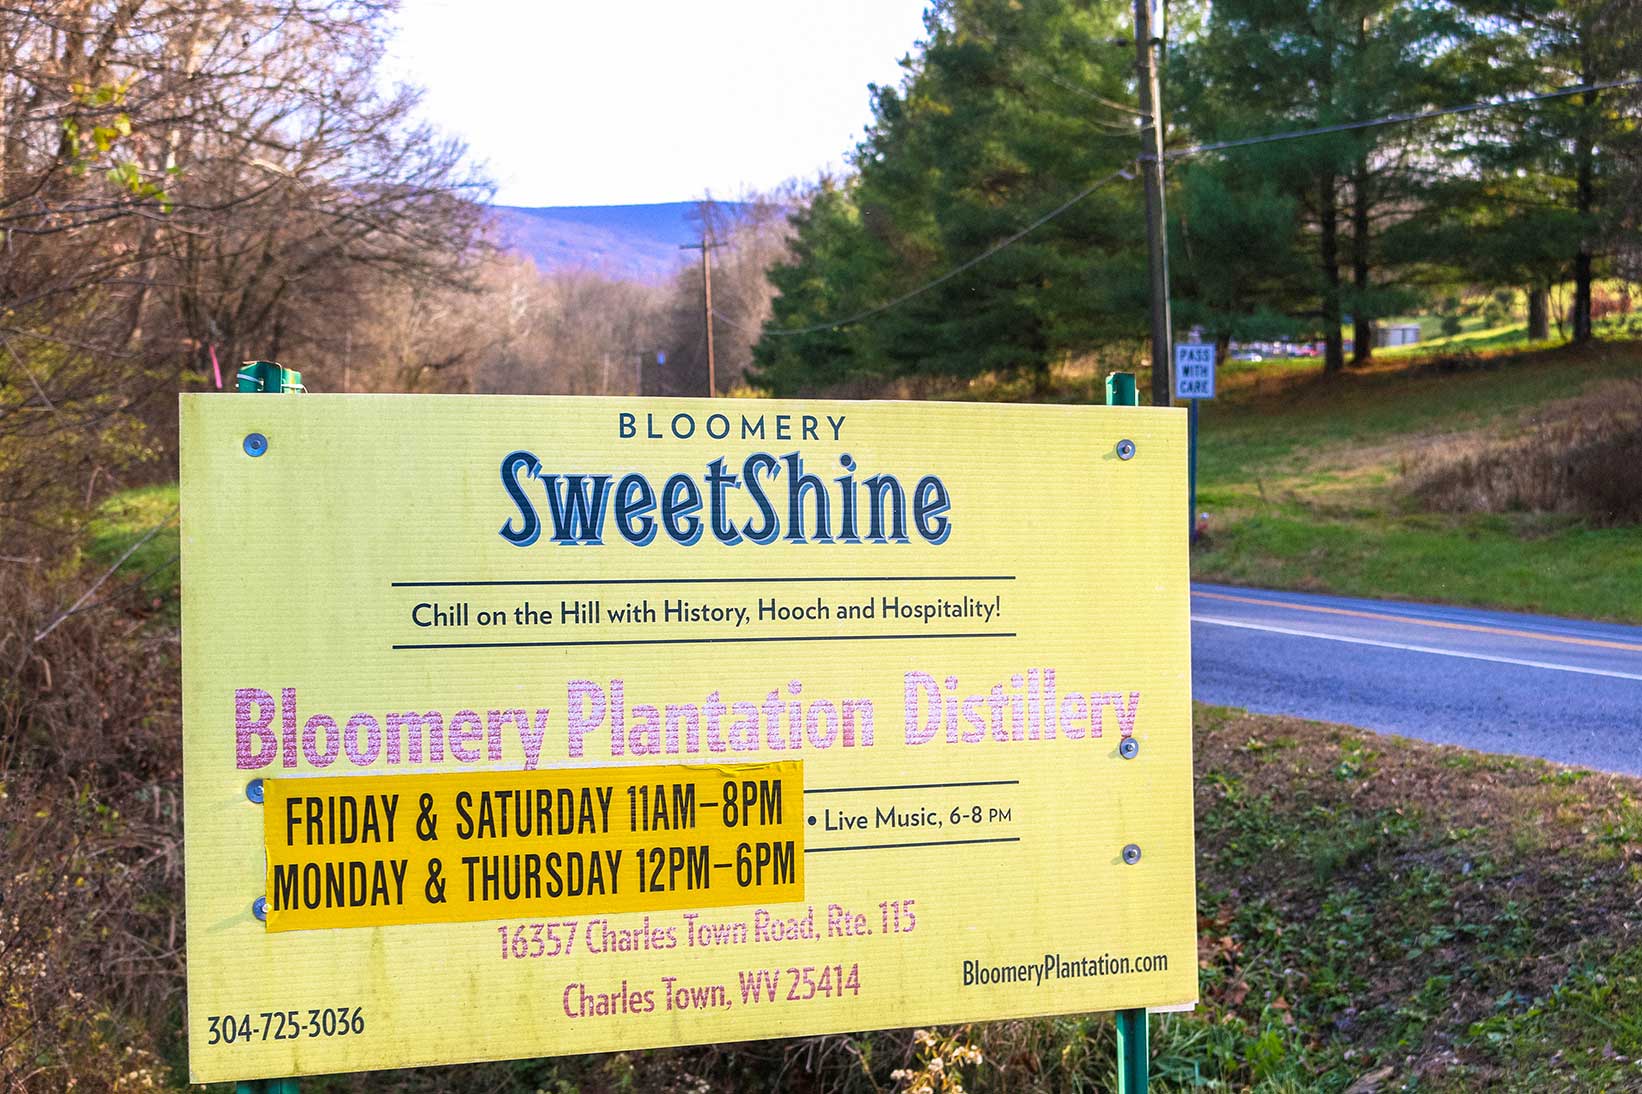 Bloomery Plantation Distillery in Charles Town, WV